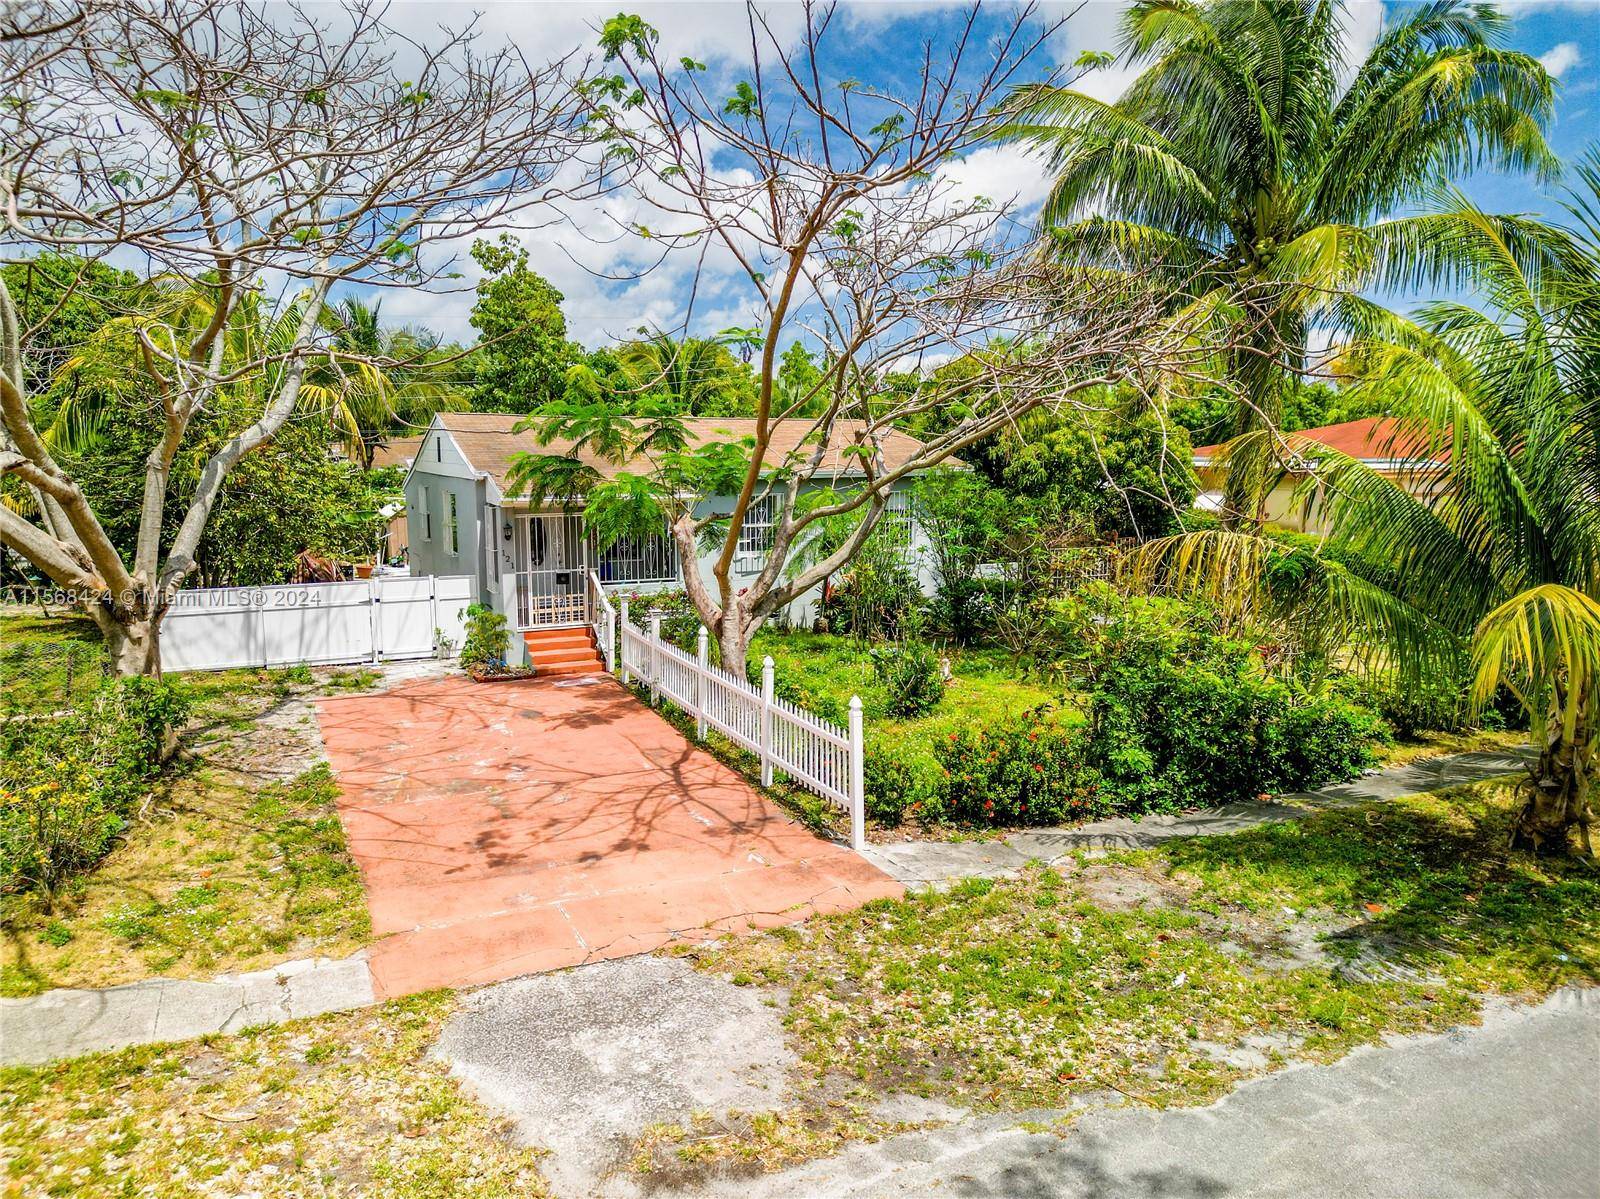 Discover the charm of this cozy single family home located in North Miami Beach, set on a spacious 8, 100 square foot lot with 3 bedrooms and 1 bathroom.